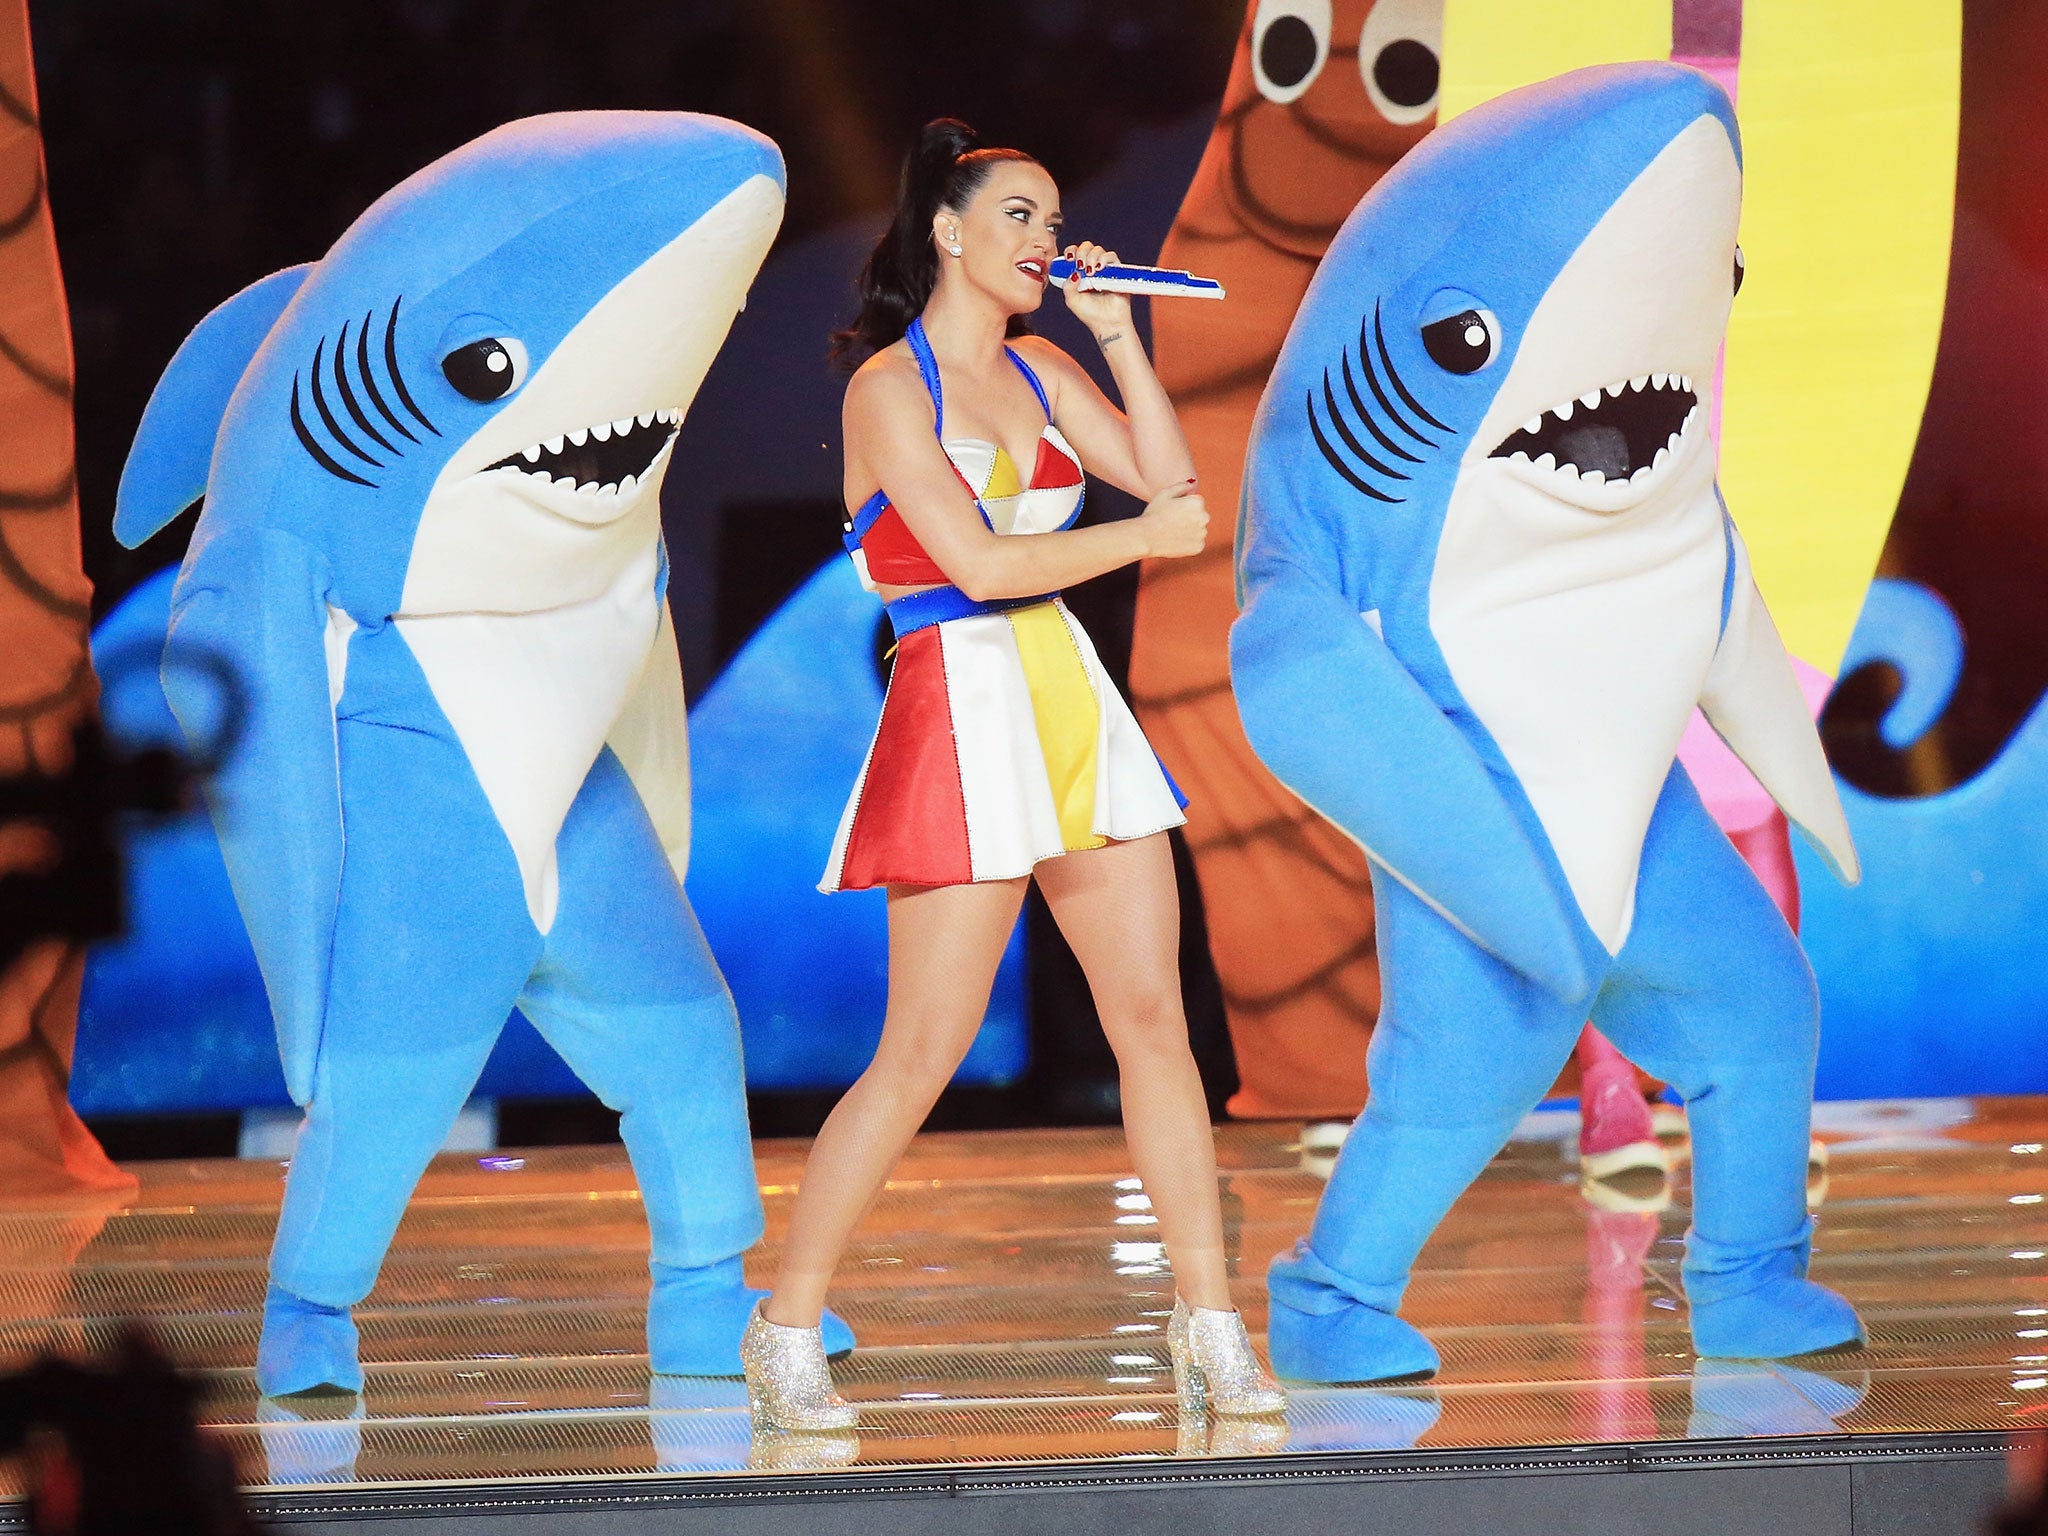 'Left Shark' was described as being 'drunk' and having 'no idea what he was doing'